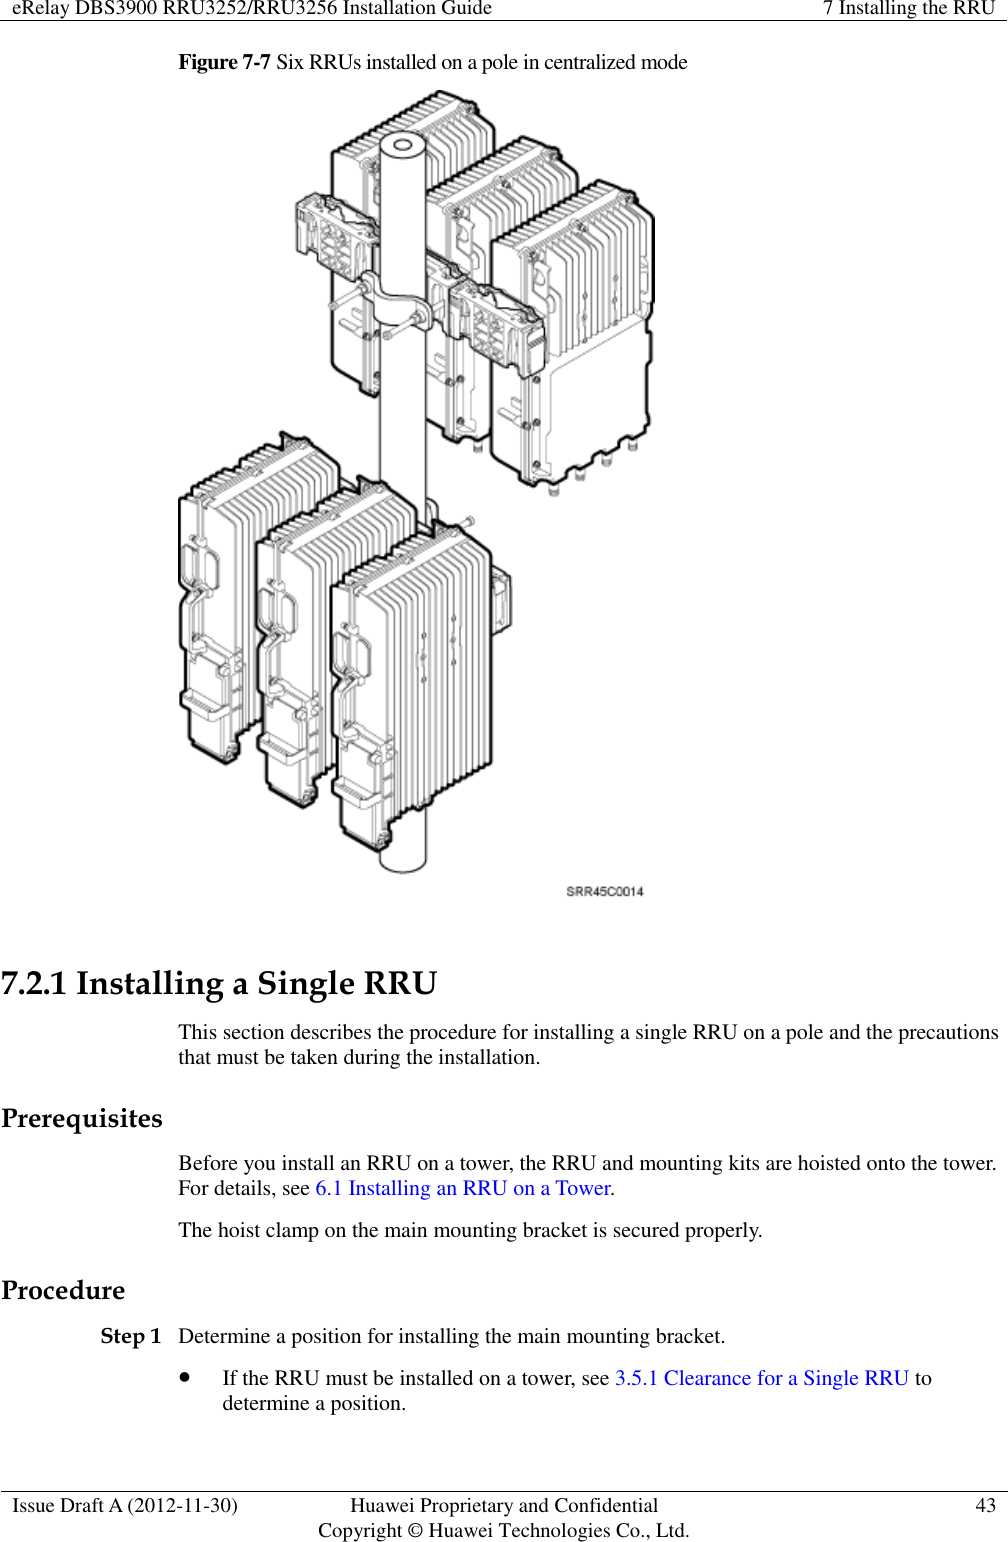 eRelay DBS3900 RRU3252/RRU3256 Installation Guide 7 Installing the RRU  Issue Draft A (2012-11-30) Huawei Proprietary and Confidential                                     Copyright © Huawei Technologies Co., Ltd. 43  Figure 7-7 Six RRUs installed on a pole in centralized mode   7.2.1 Installing a Single RRU This section describes the procedure for installing a single RRU on a pole and the precautions that must be taken during the installation. Prerequisites Before you install an RRU on a tower, the RRU and mounting kits are hoisted onto the tower. For details, see 6.1 Installing an RRU on a Tower.   The hoist clamp on the main mounting bracket is secured properly. Procedure Step 1 Determine a position for installing the main mounting bracket.    If the RRU must be installed on a tower, see 3.5.1 Clearance for a Single RRU to determine a position.   